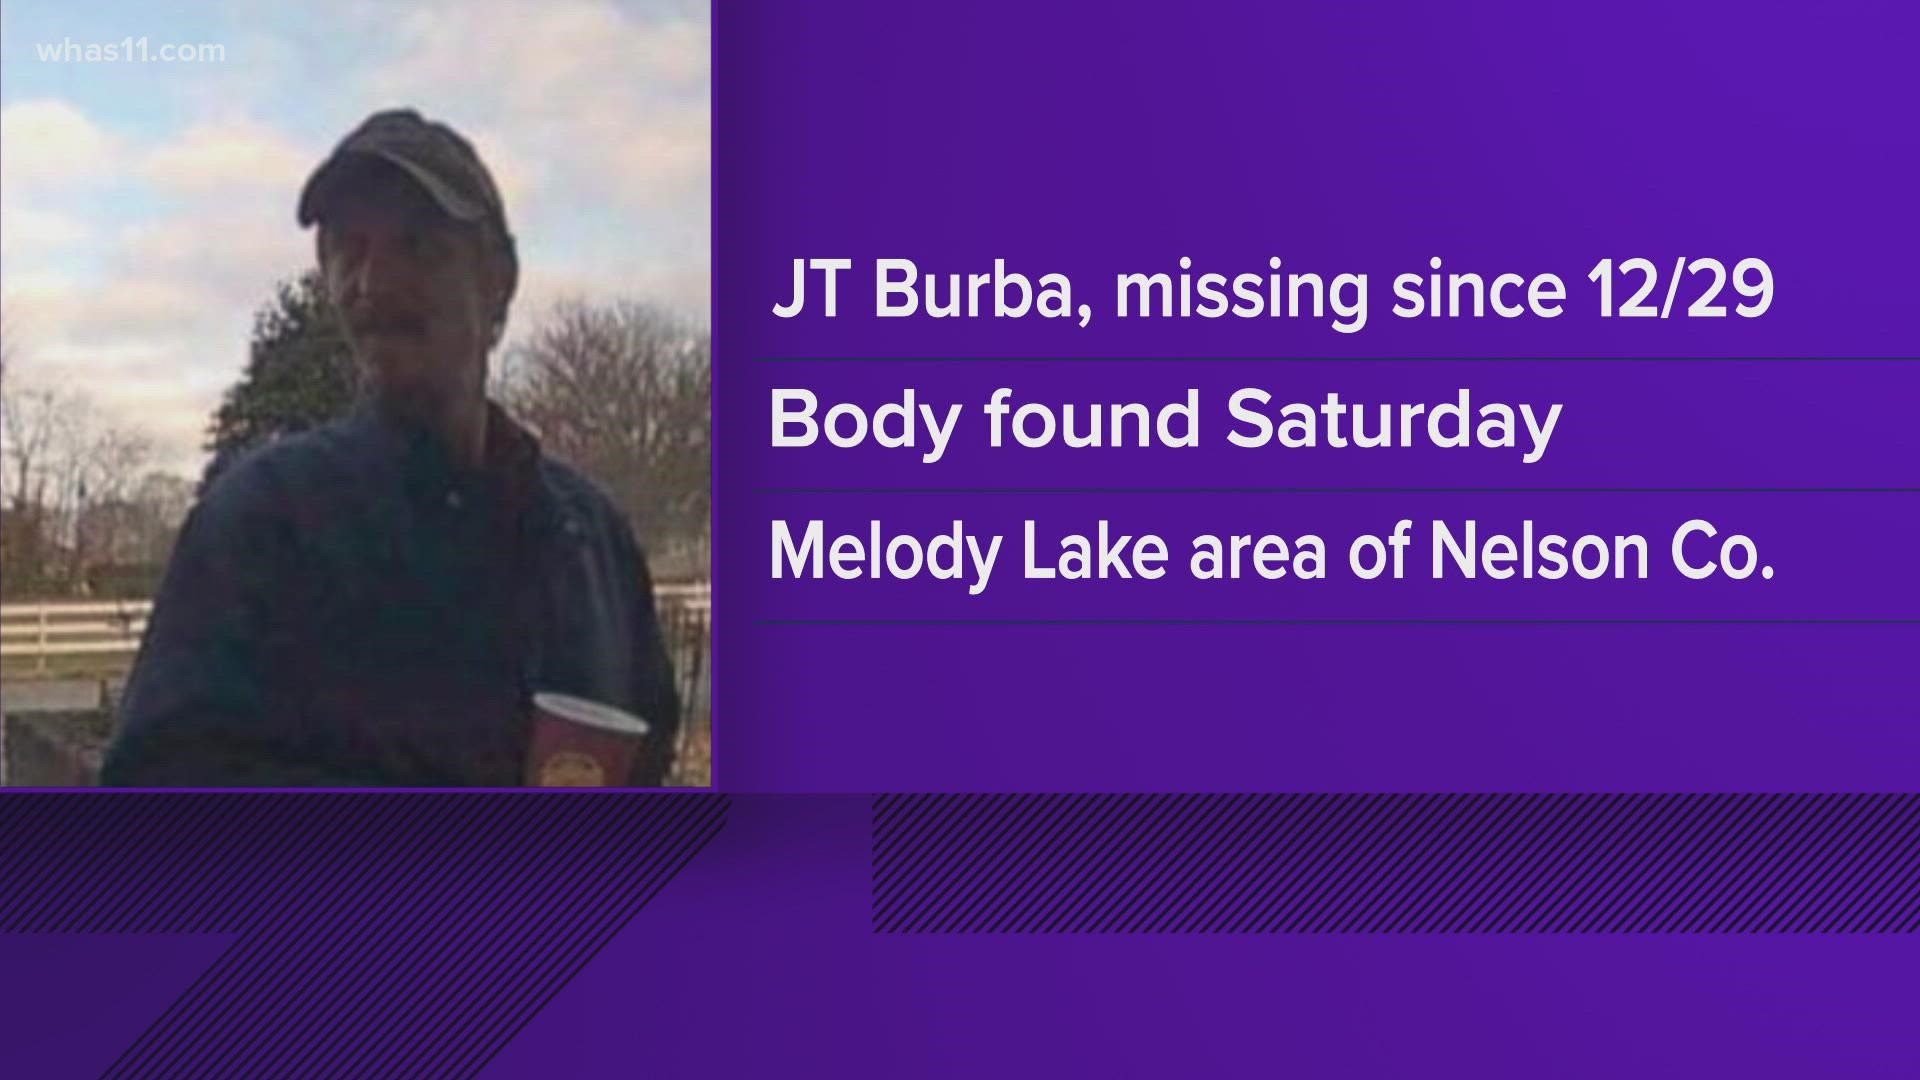 The body of J.T. Burba was found at Melody Lake on Saturday, according to the Nelson County Sheriff's Department.